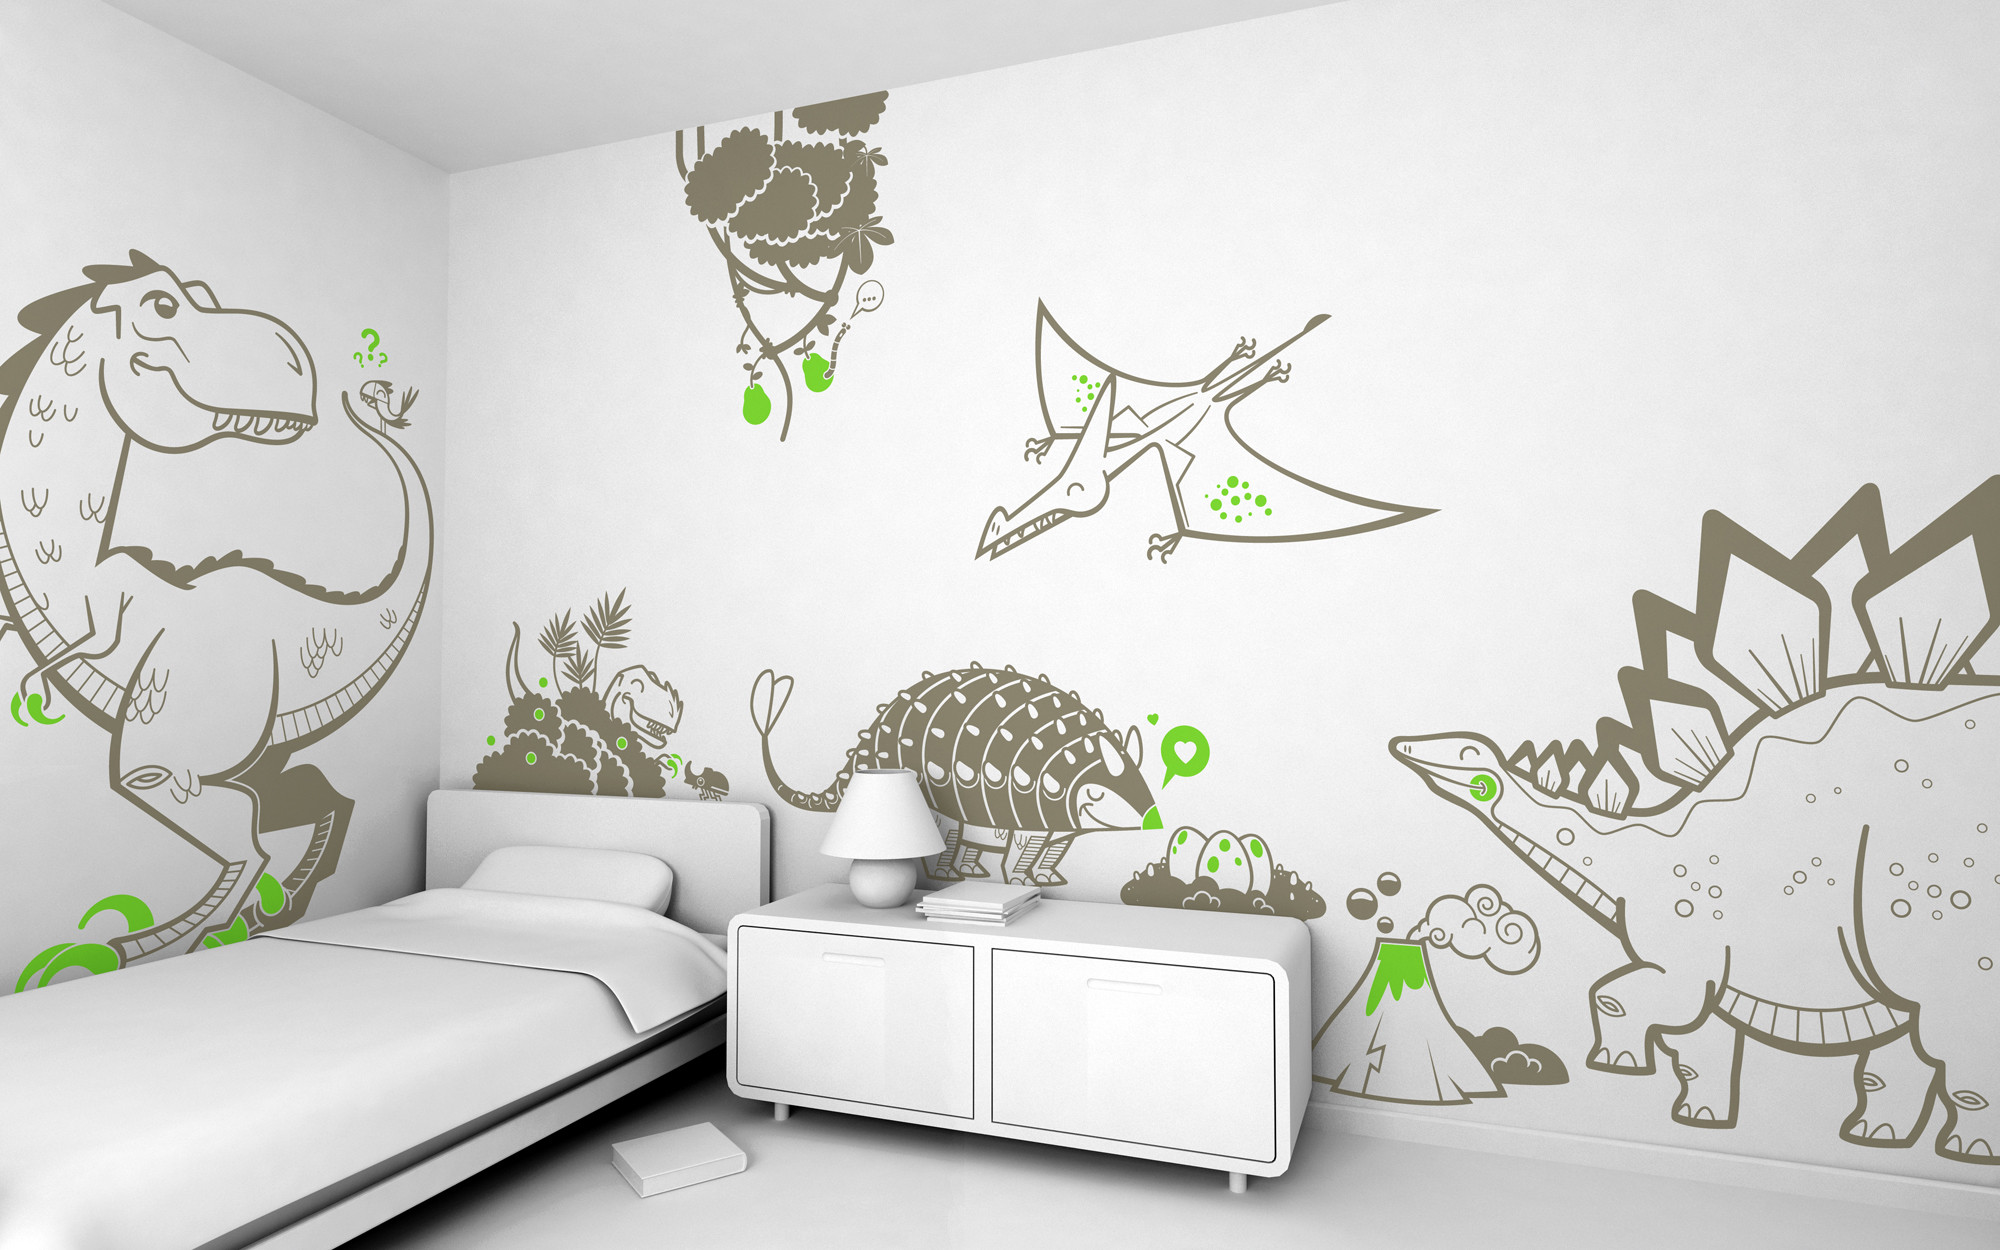 Wall Sticker For Kids Room
 giant kids wall decals by E GLUE Studio at Coroflot